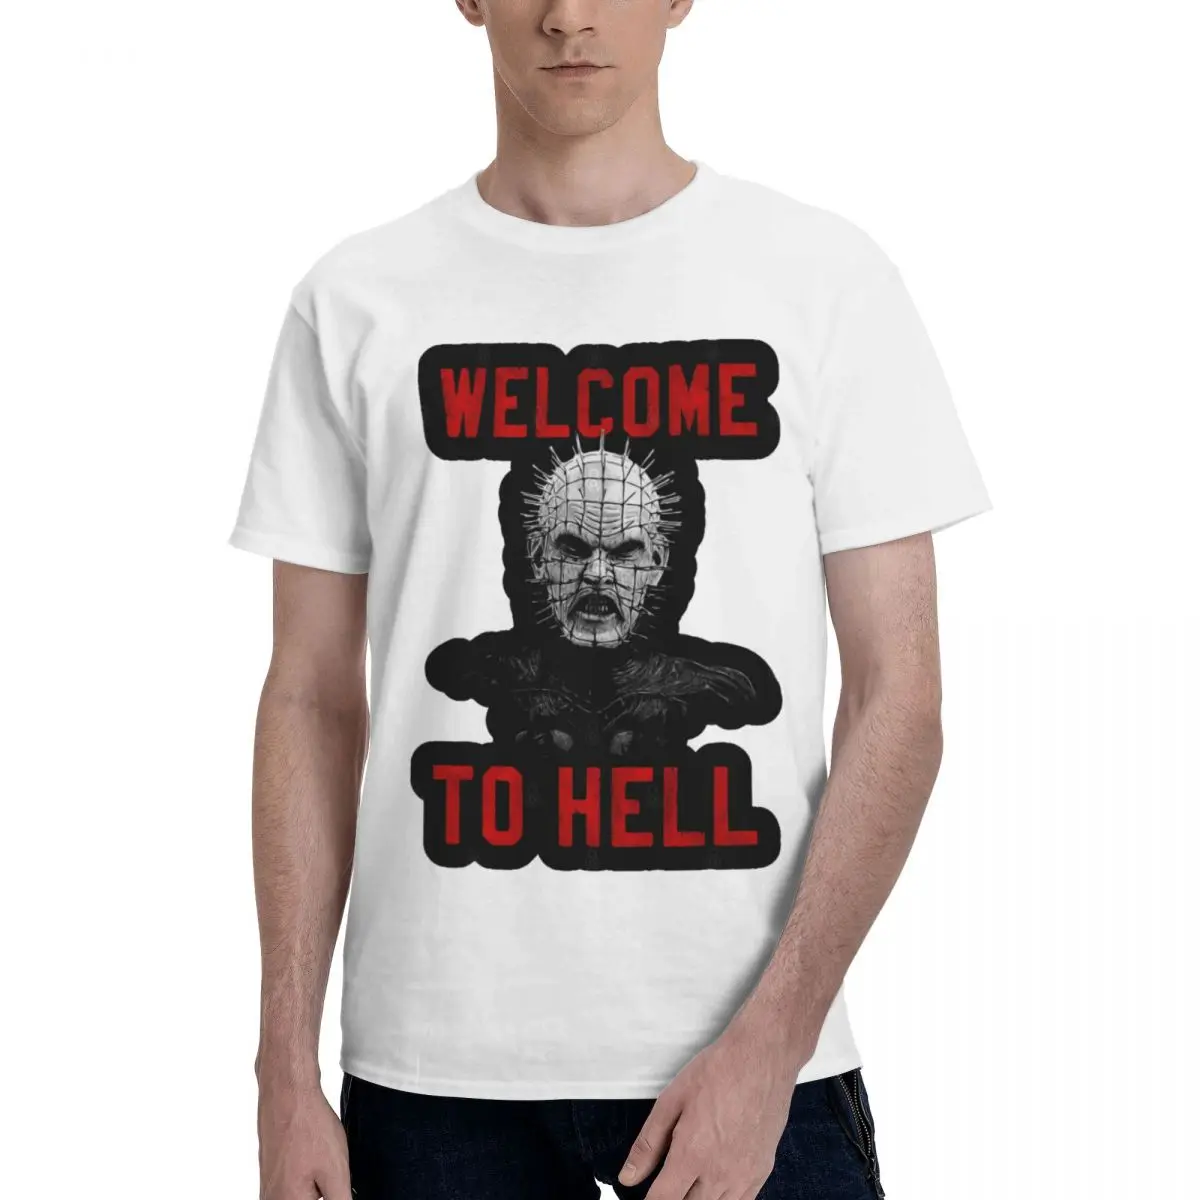 

Welcome Hell 14 Top tee Creative Humor Graphic High quality Adult T-shirt Crewneck Fitness Eur Size